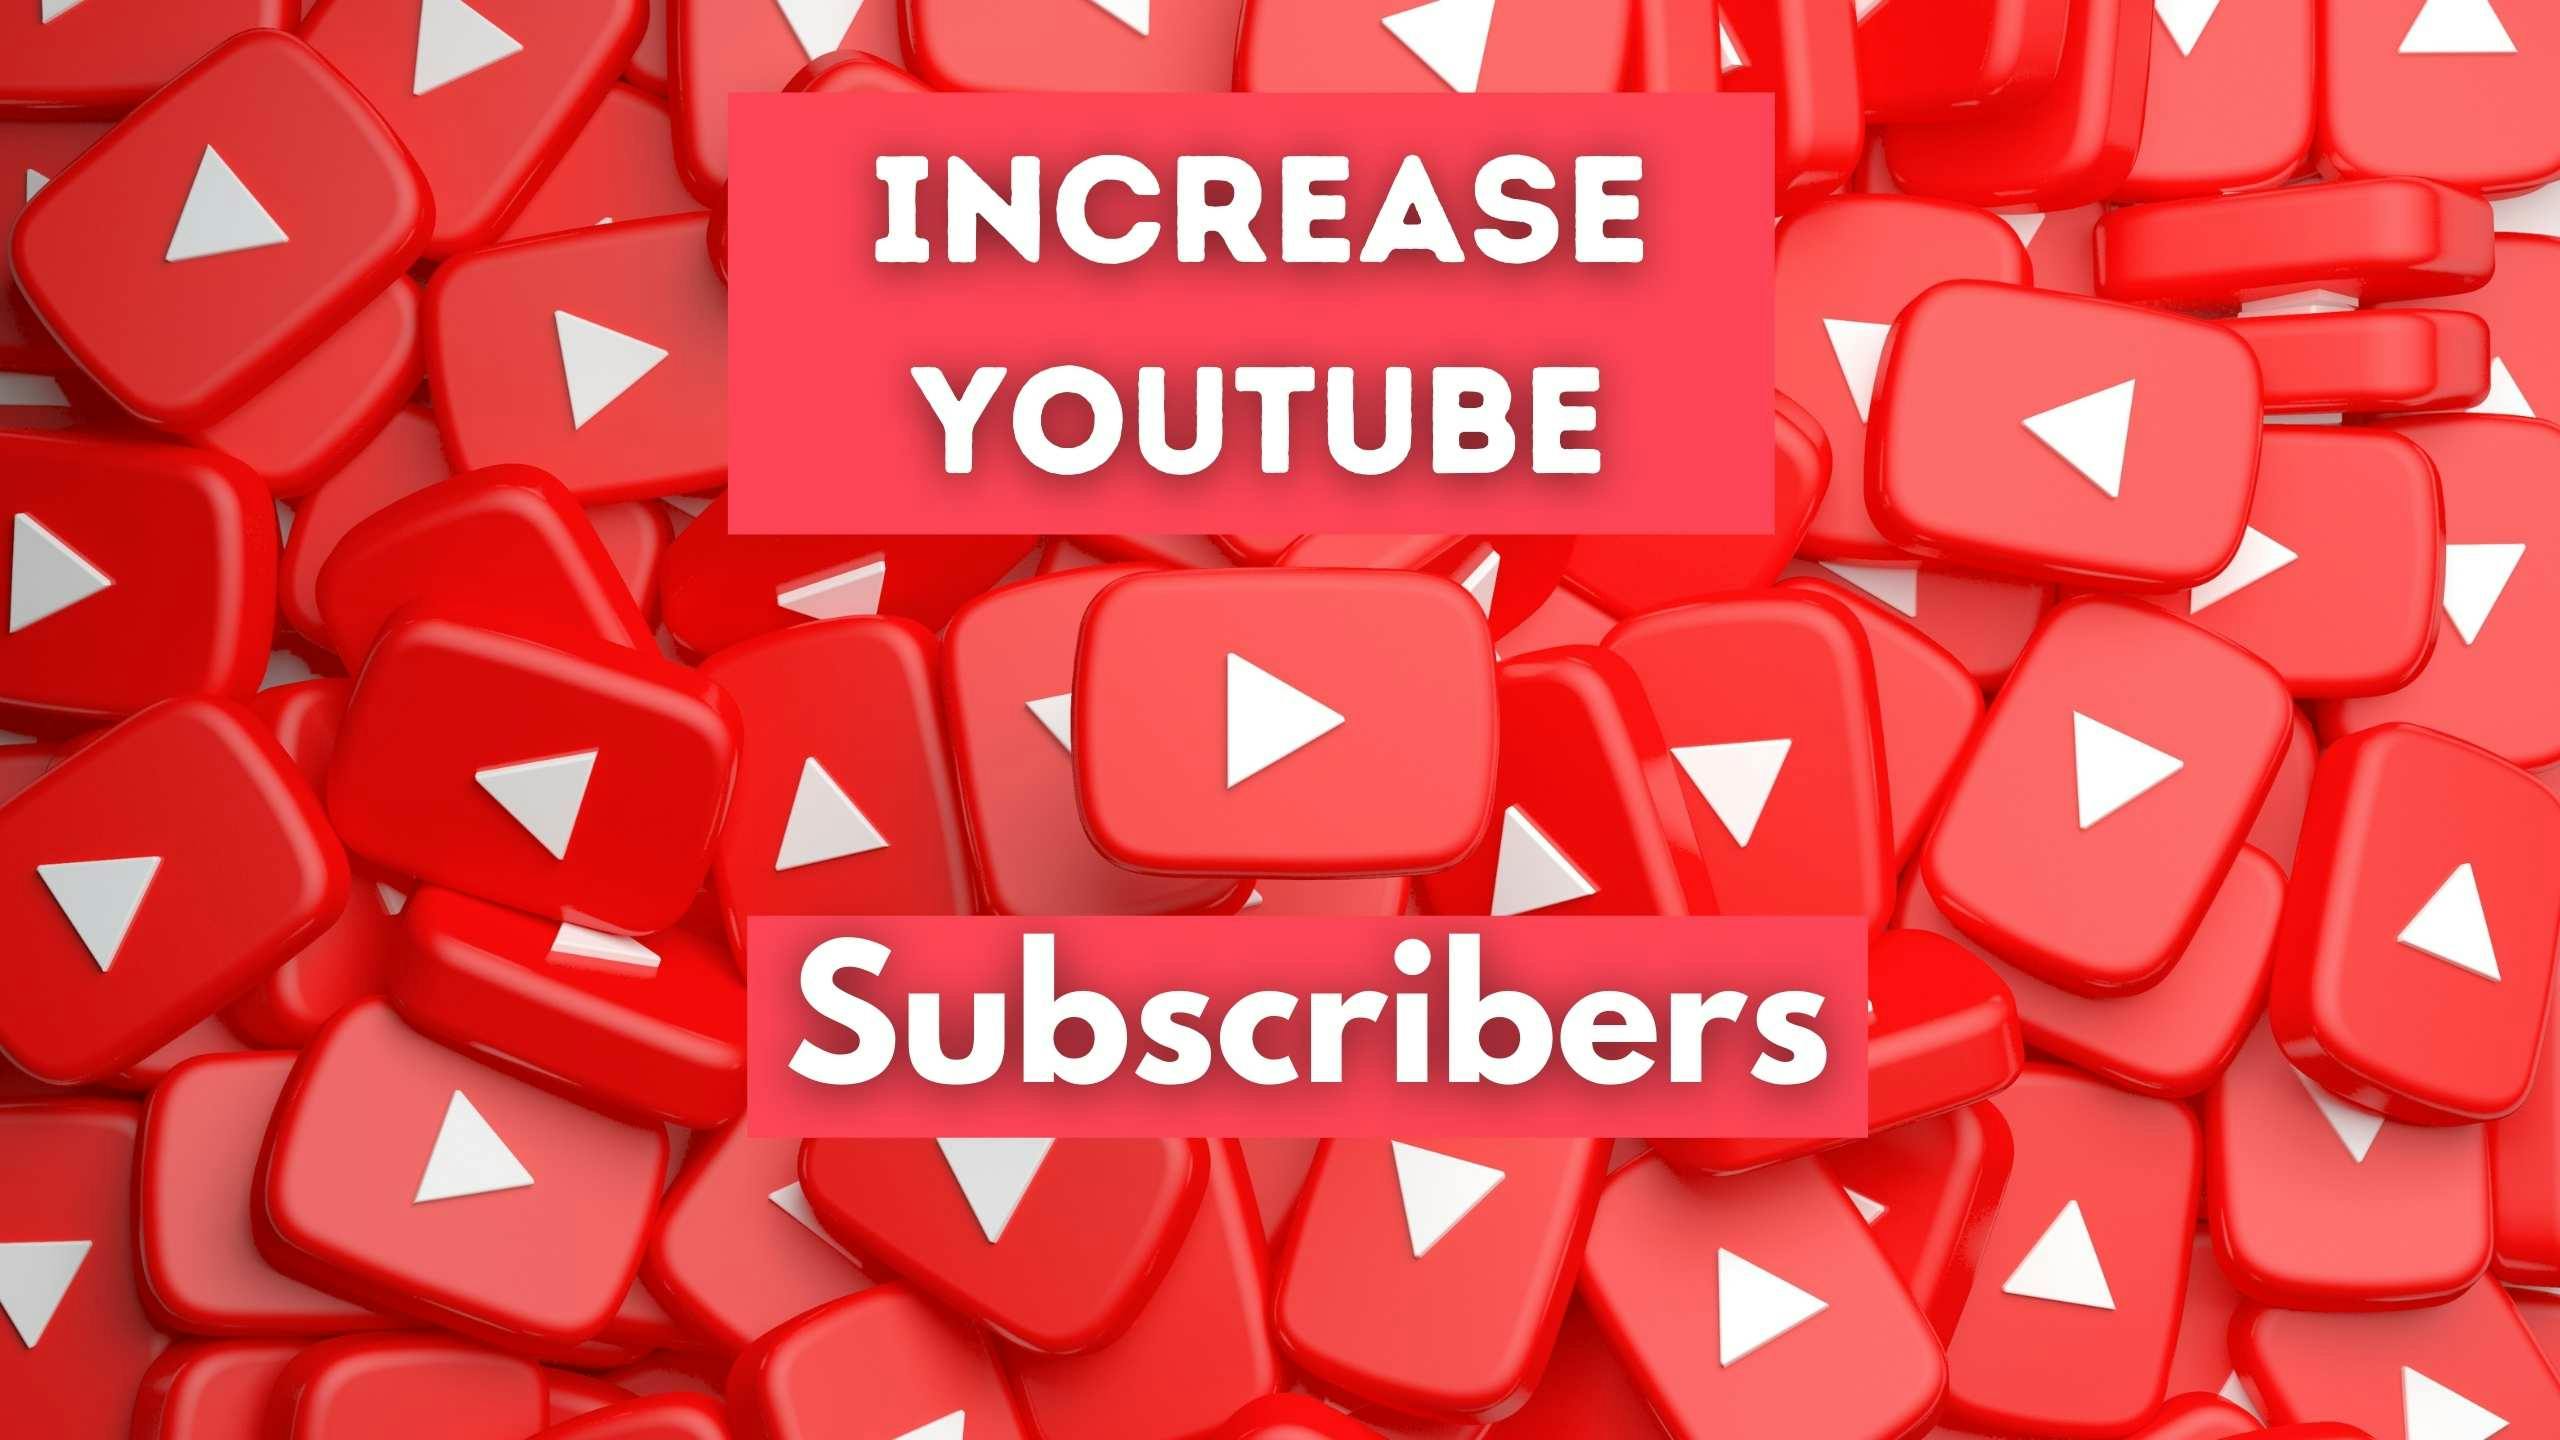 How to Increase Youtube Subscribers for free